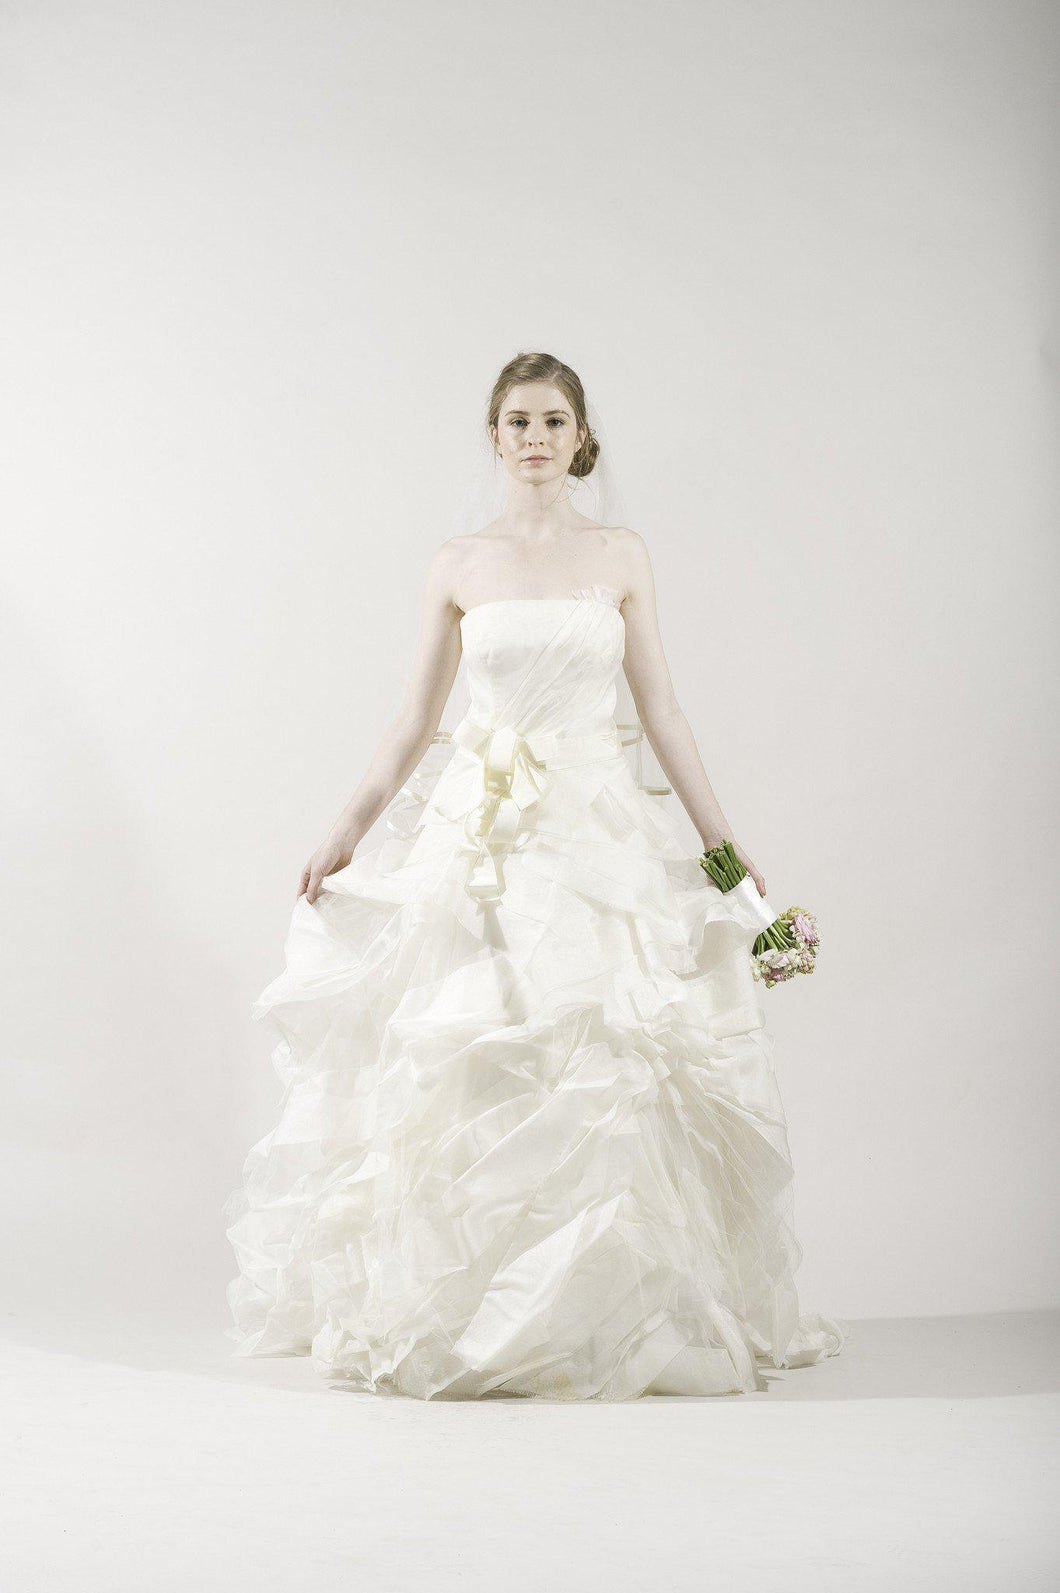 Vera Wang 'Deidre' Ivory Strapless Tulle Gown - Vera Wang - Nearly Newlywed Bridal Boutique - 1